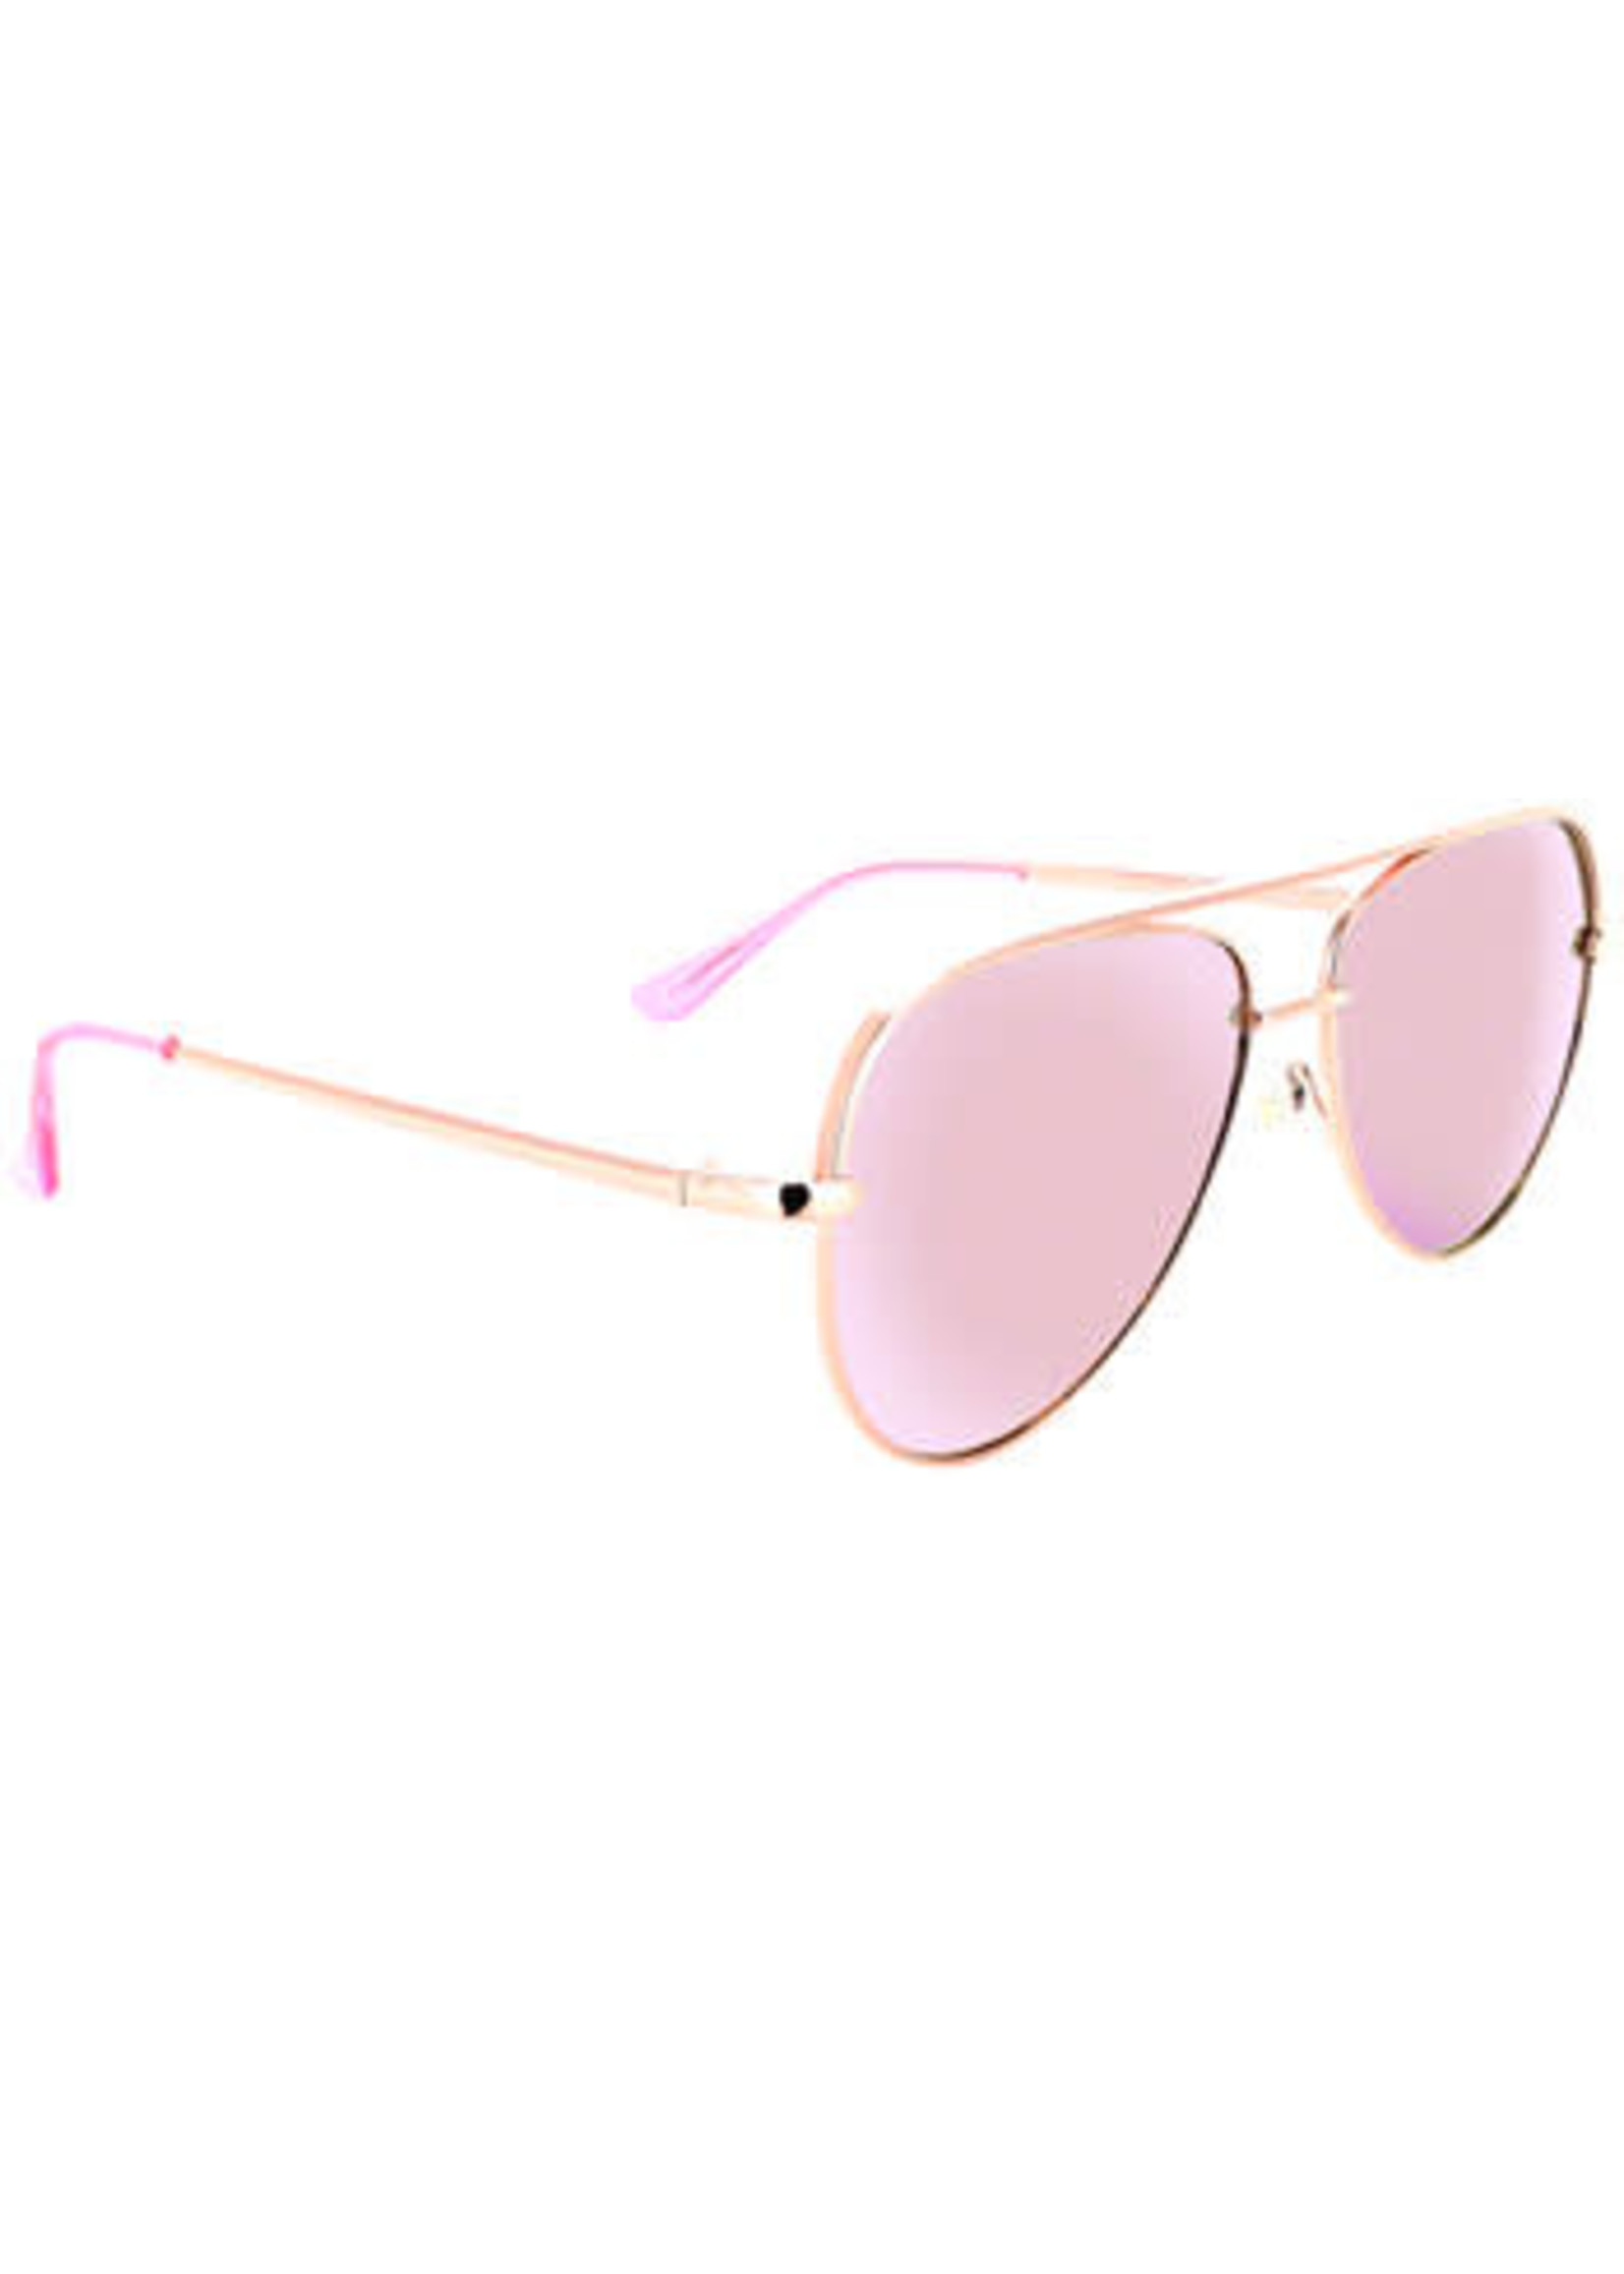 Optic Nerve ONE by Optic Nerve Retroport Sunglasses - Rose Gold Polarized Smoke Lens with Rose Gold Mirror